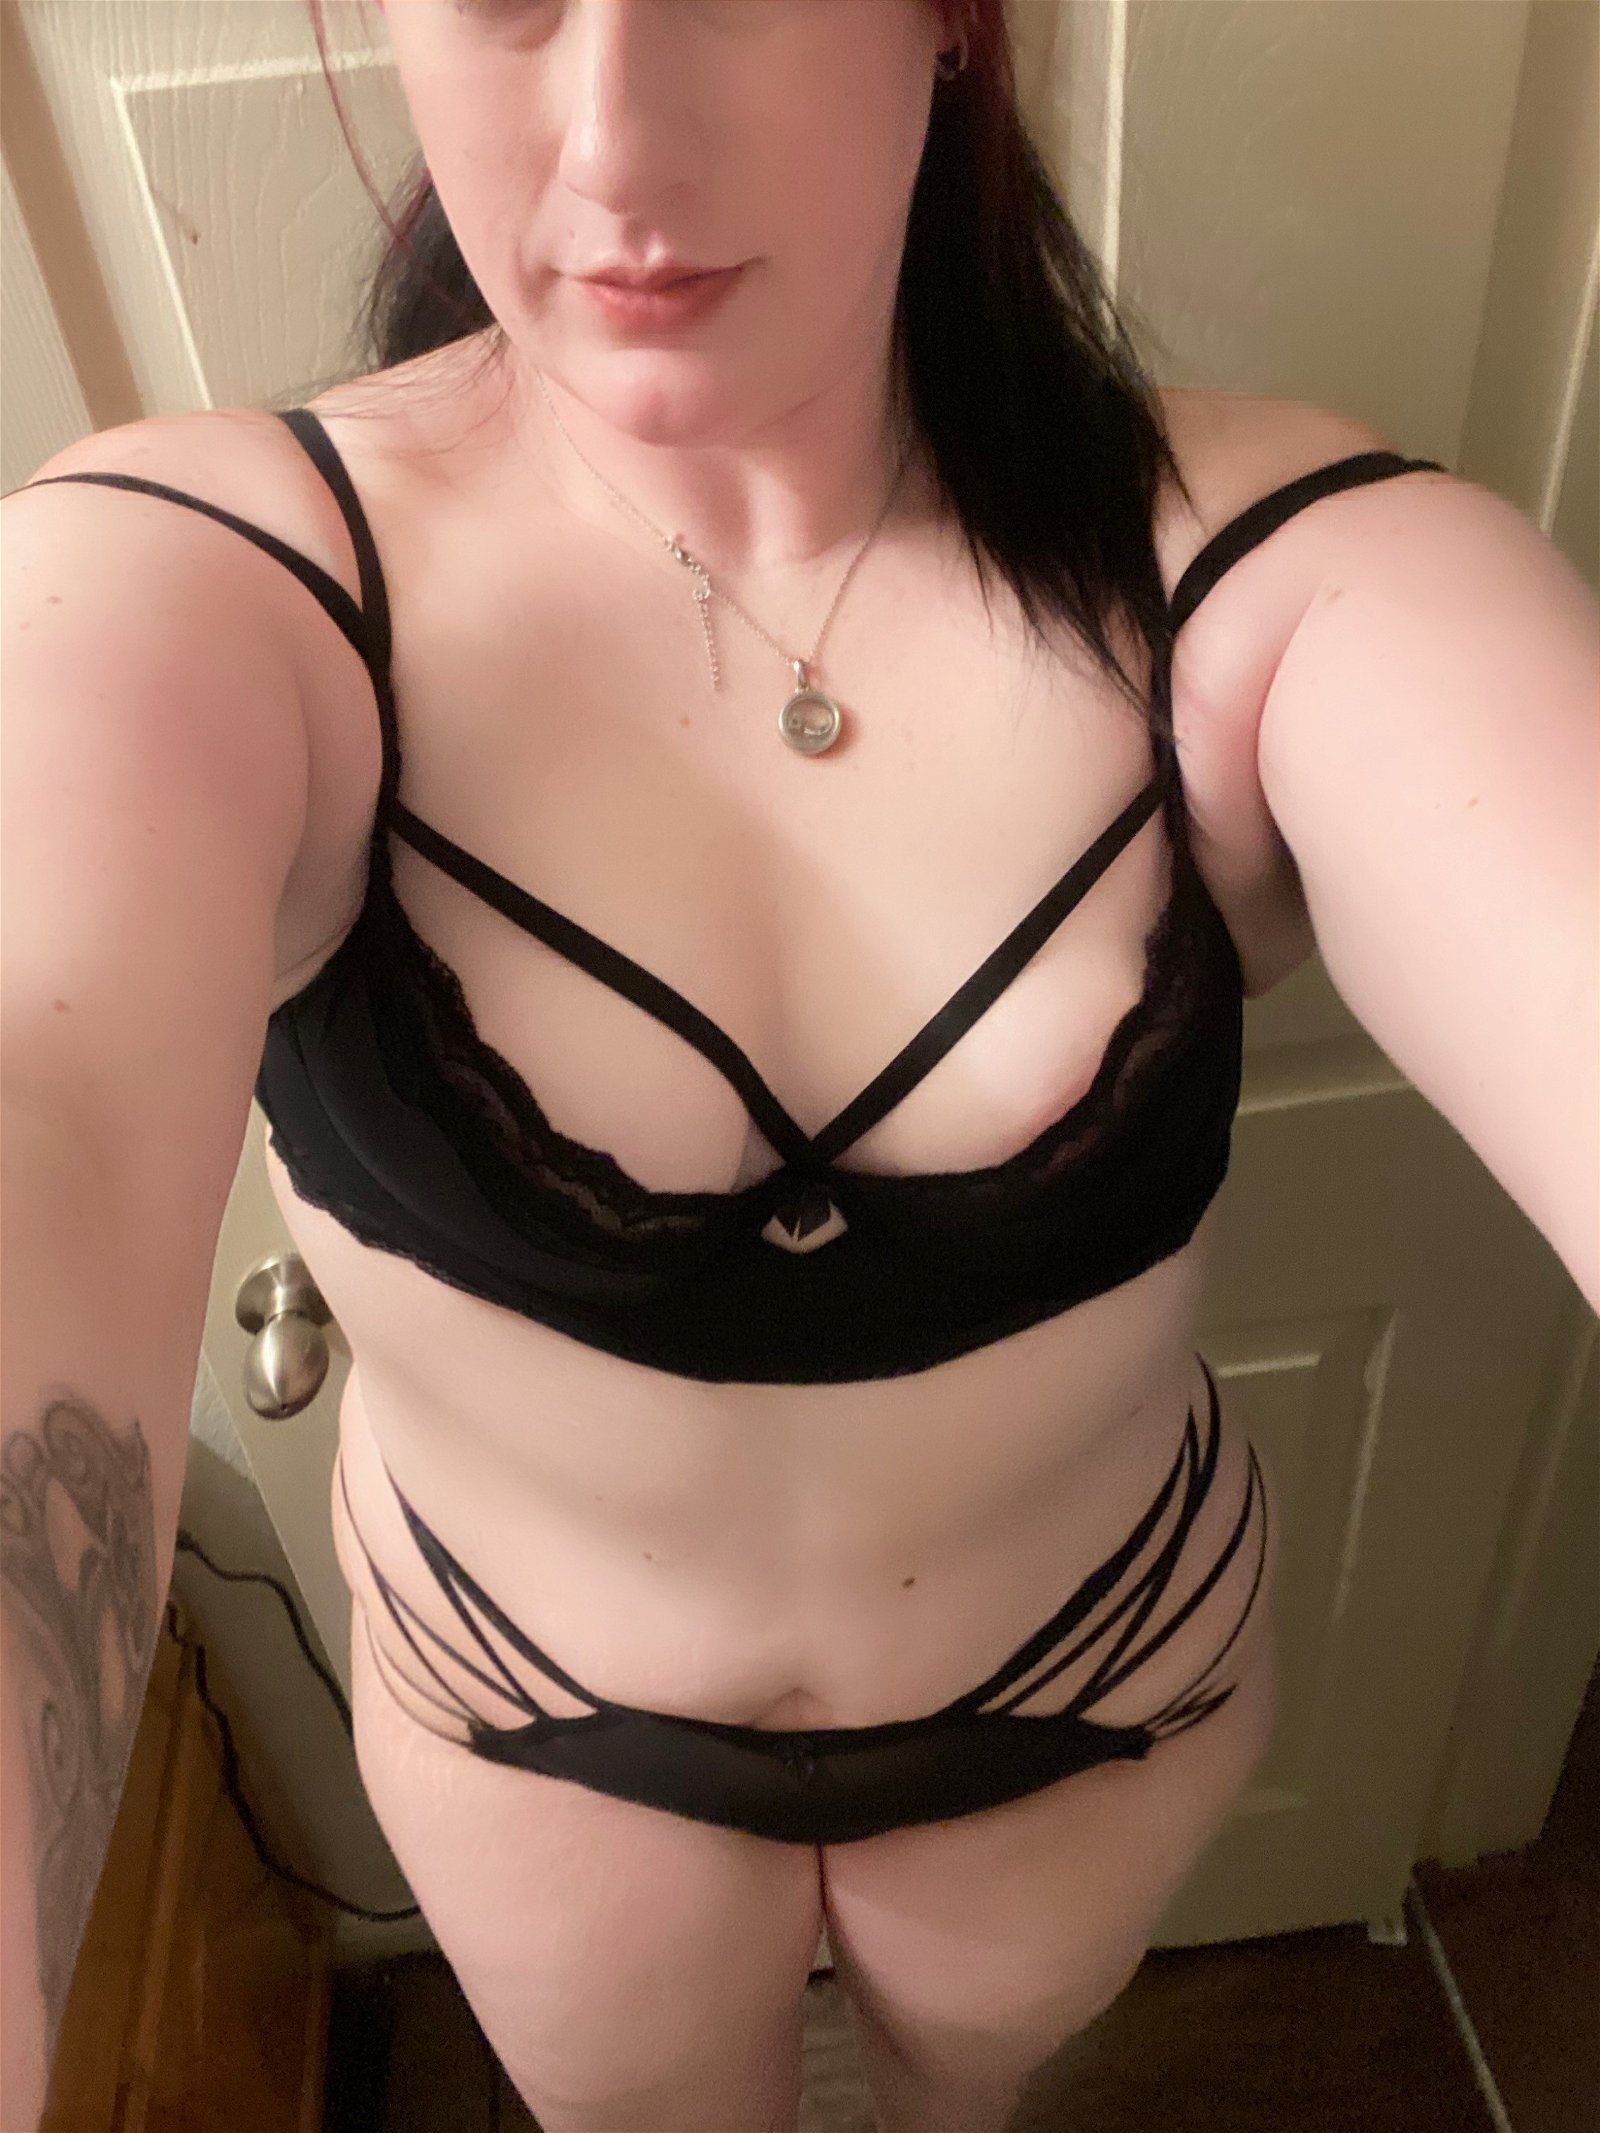 Photo by Raven moon with the username @ravenmoonscry, who is a star user, posted on March 3, 2020. The post is about the topic Amateurs and the text says 'new lingerie💋'